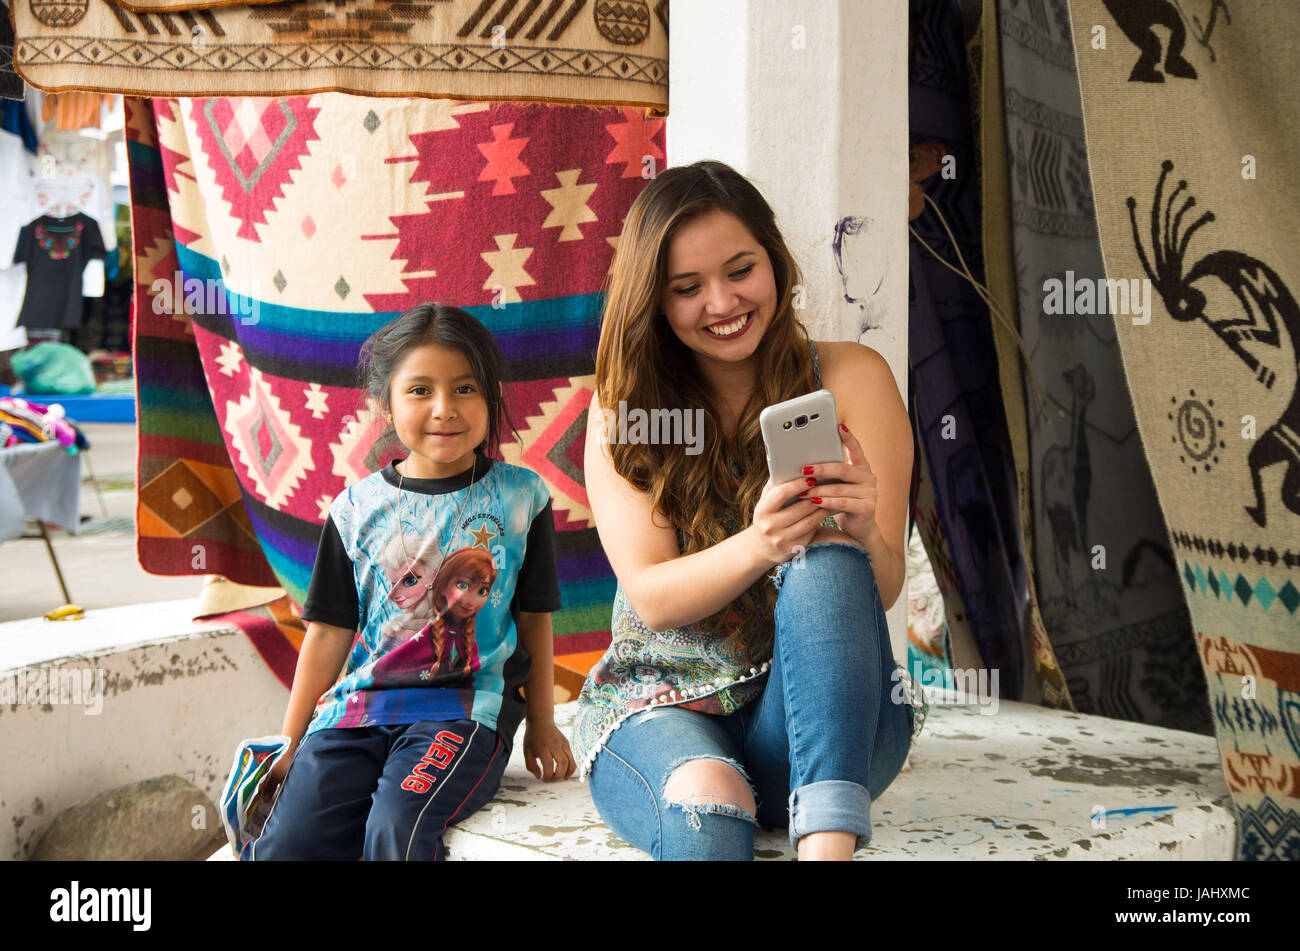 OTAVALO, ECUADOR - MAY 17, 2017: Beautiful young woman watching her cellphone next to an unidentified little indigenous girl, in colorful fabrics background Stock Photo